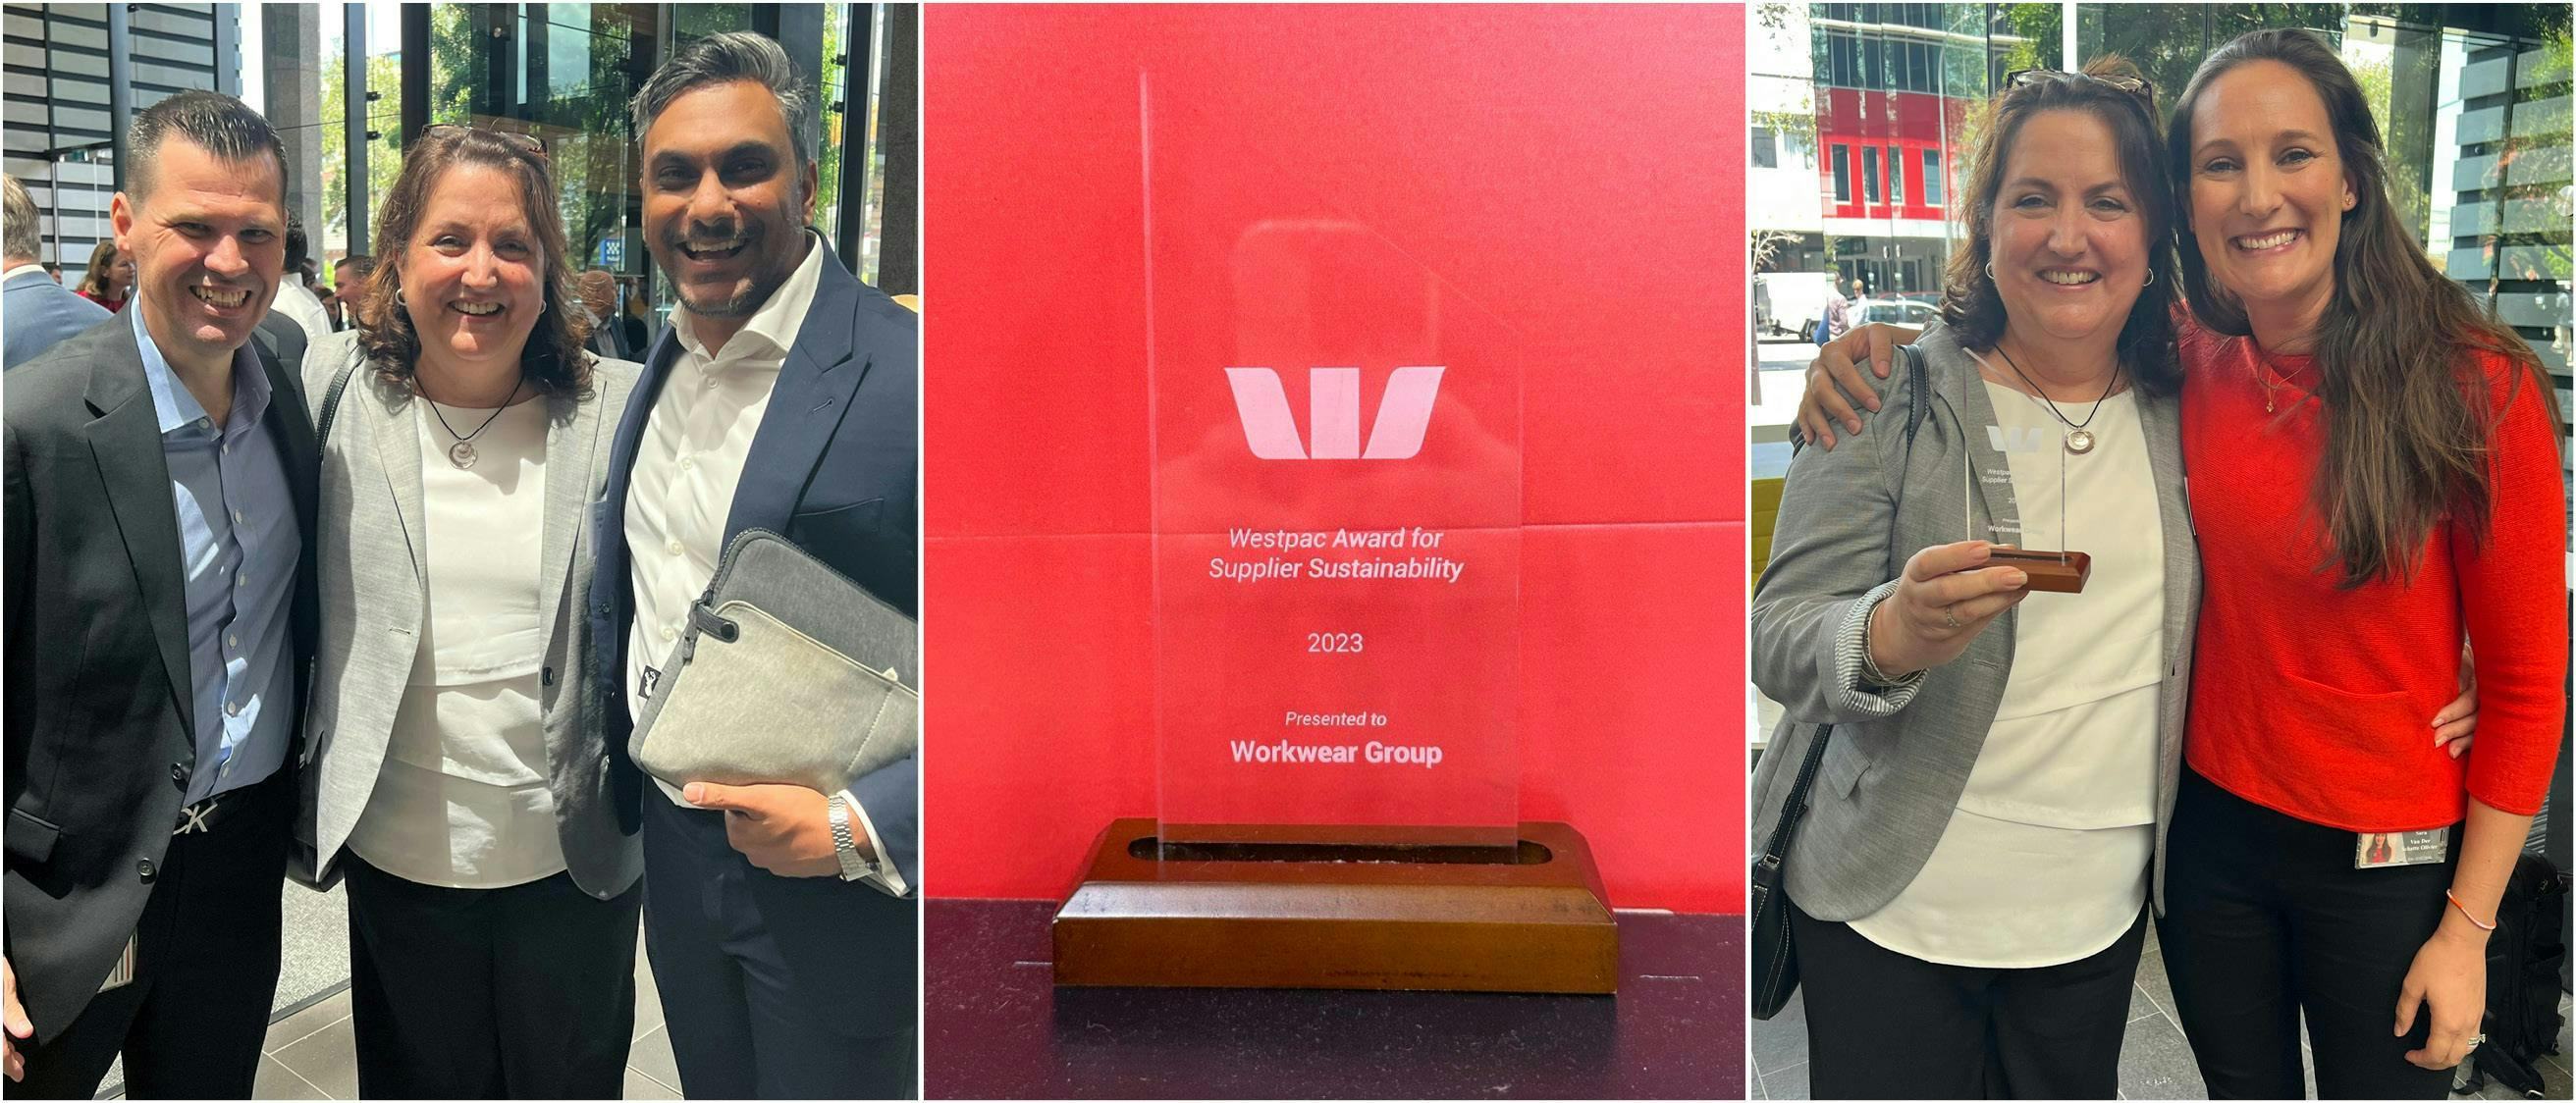 Westpac Award for Supplier Sustainability, awarded to Workwear Group